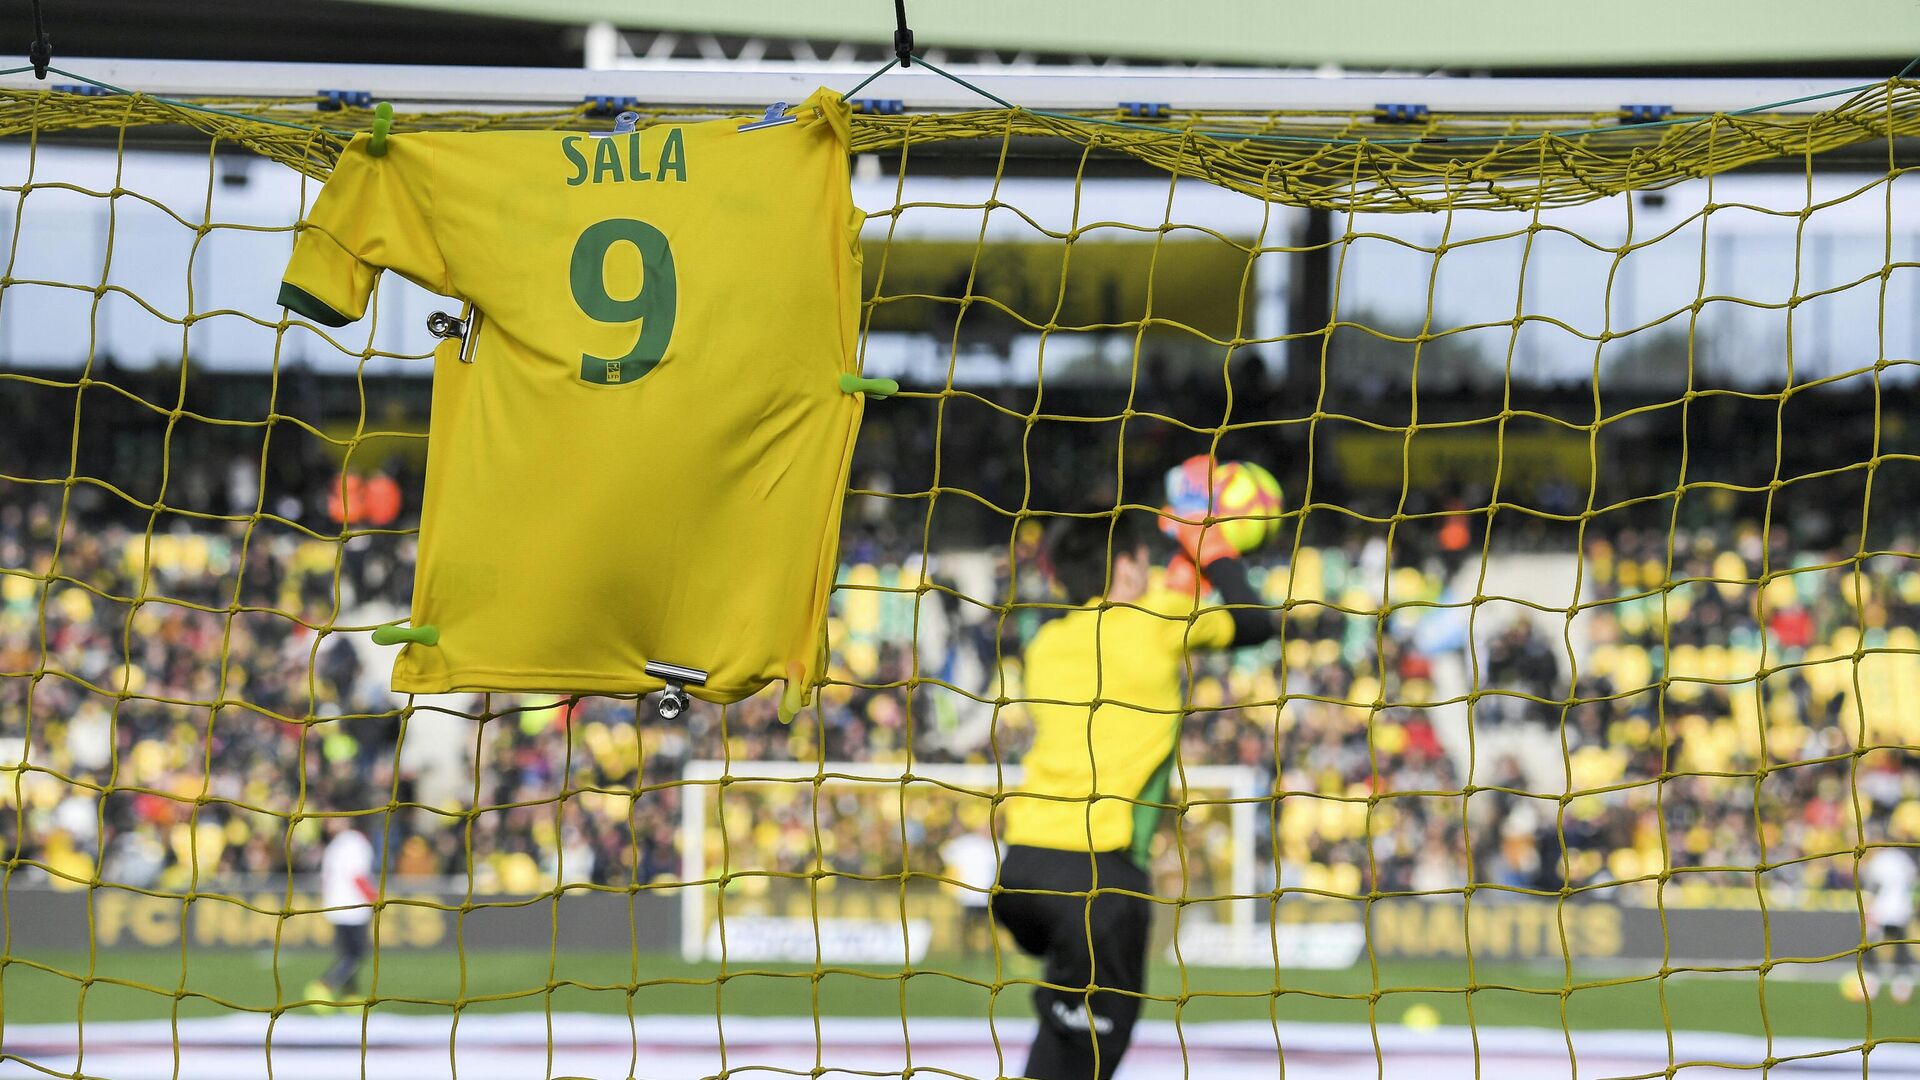 A #9 jersey is displayed on the goal in memory of late Argentinian forward Emiliano Sala prior to the French L1 football match between FC Nantes and Nimes Olympique at the La Beaujoire stadium in Nantes, western France on February 10, 2019. - FC Nantes football club announced on February 8, 2019 that it will freeze the #9 jersey as a tribute to Cardiff City and former Nantes footballer Emiliano Sala who died in a plane crash in the English Channel on January 21, 2019. (Photo by LOIC VENANCE / AFP) - РИА Новости, 1920, 10.03.2021